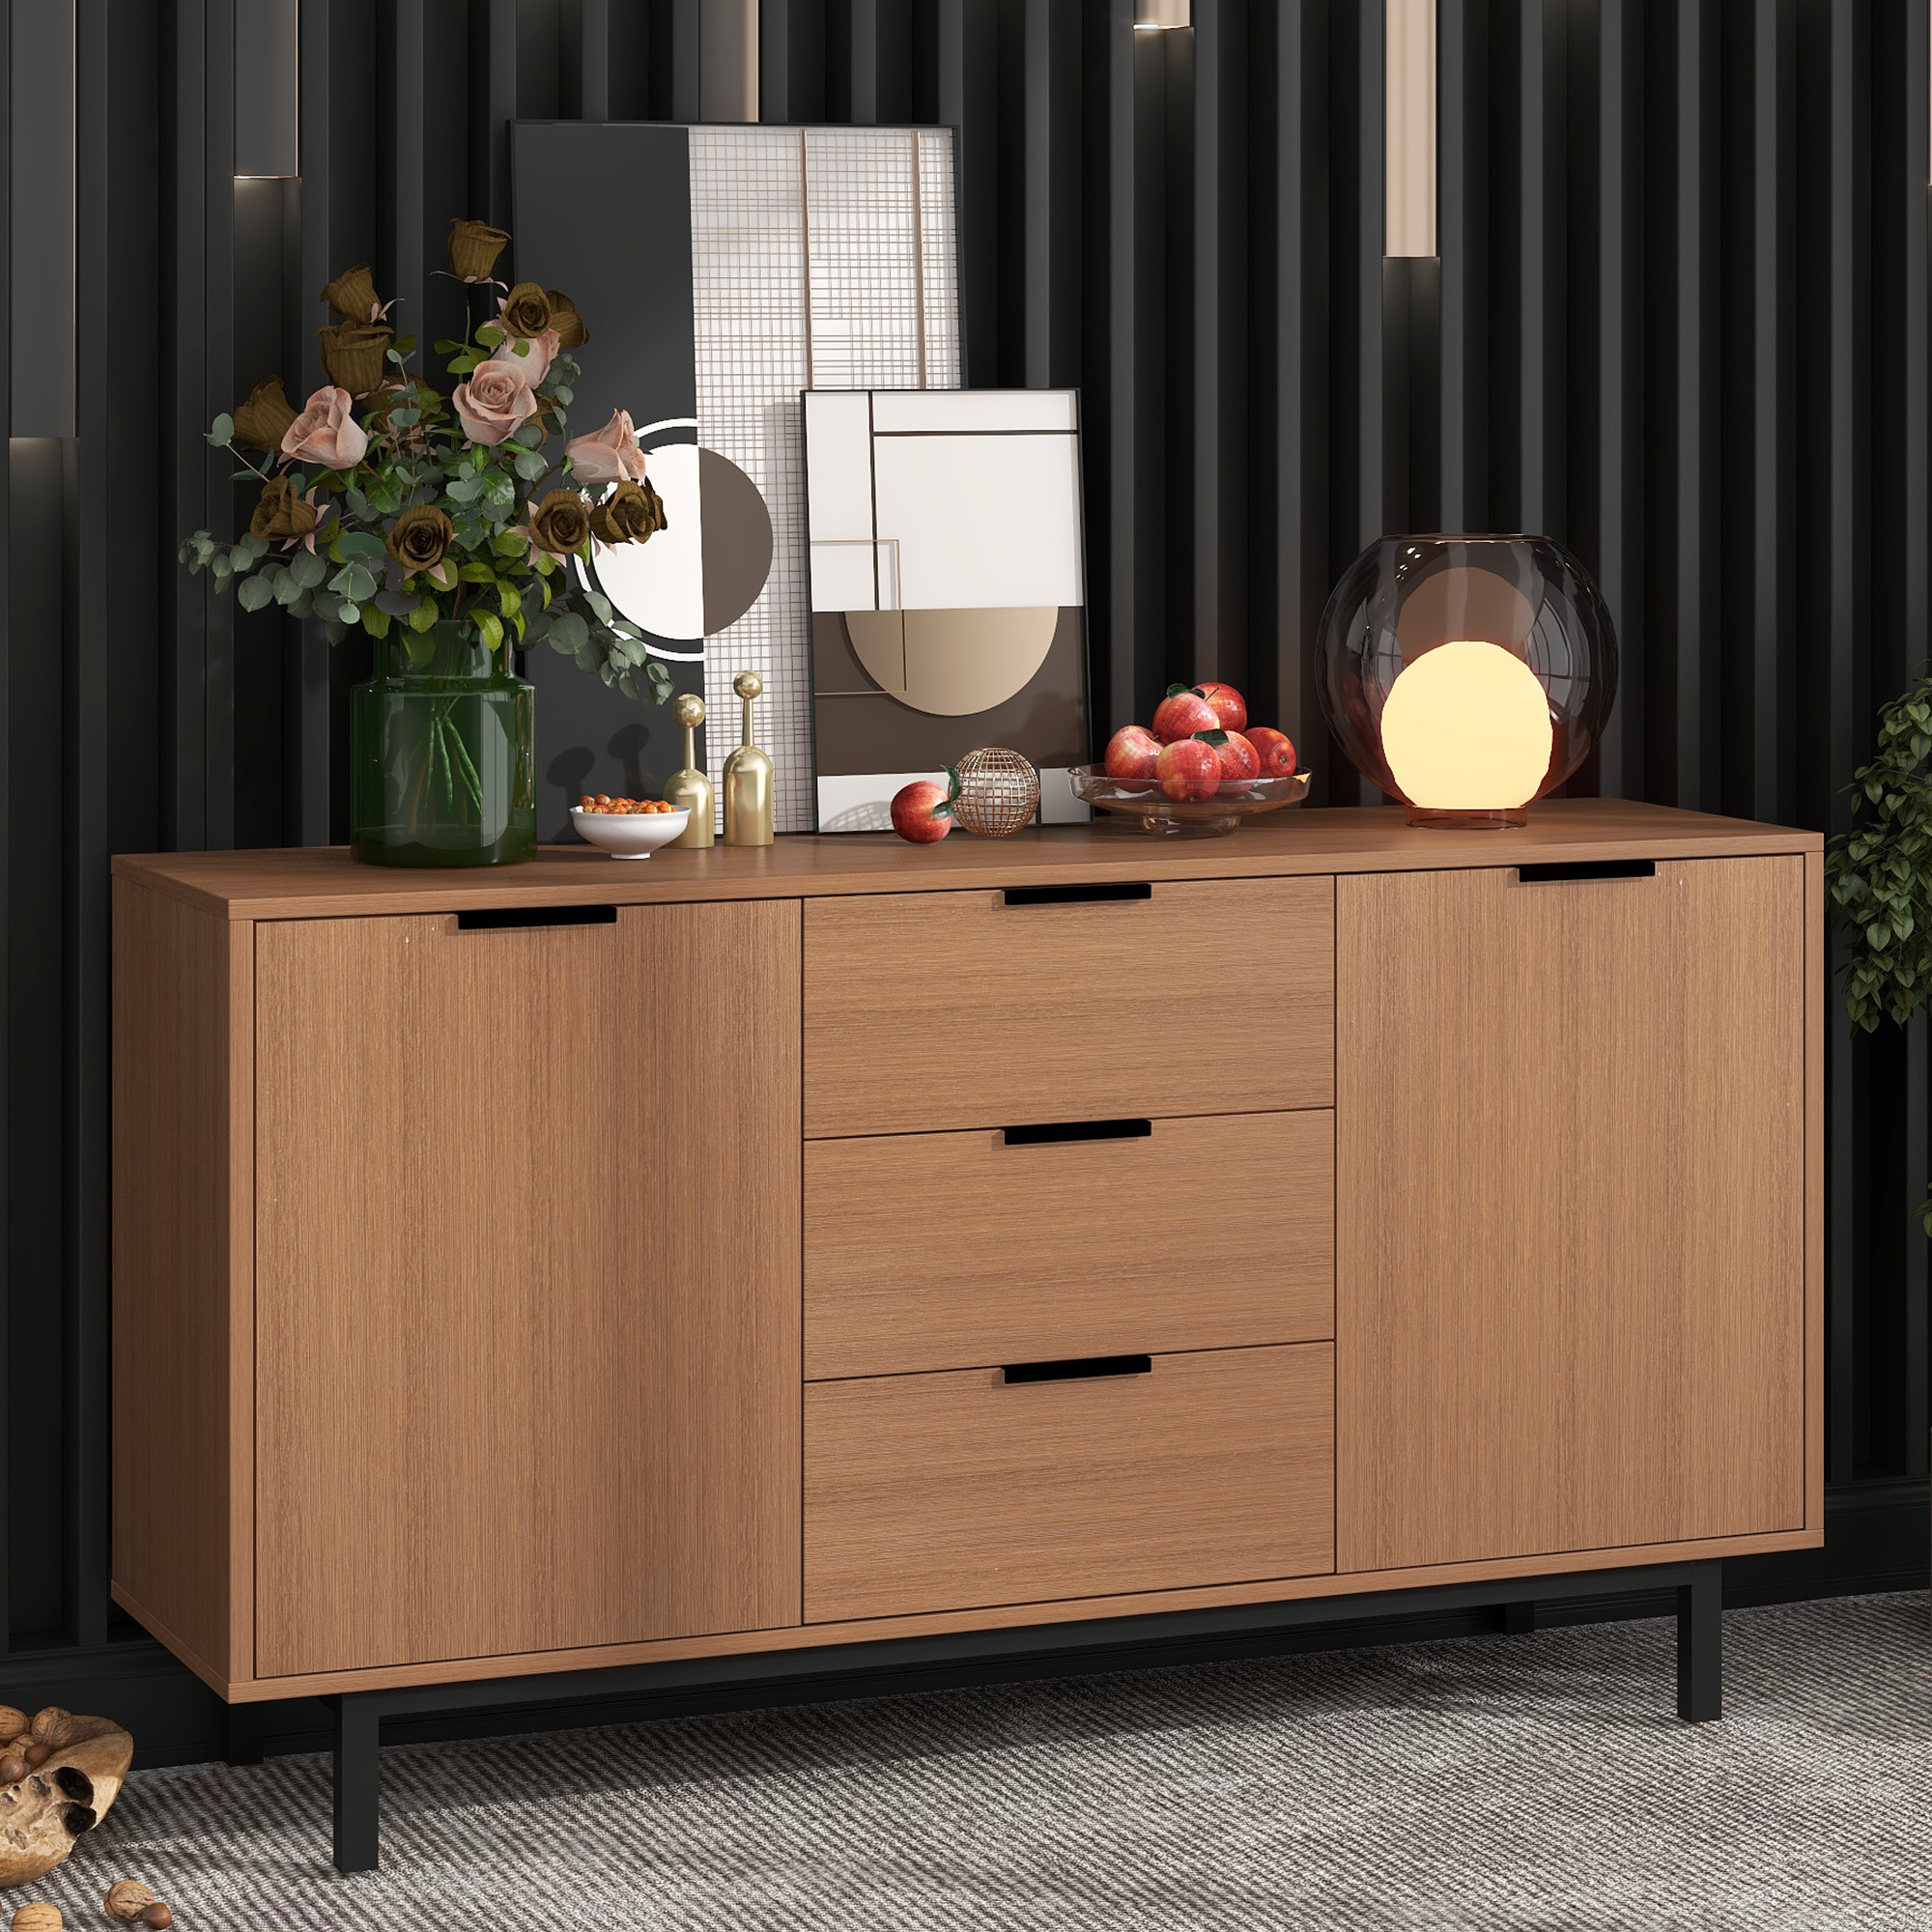 Contemporary Style Sideboard Particleboard with Wood Grain Stickers Large Storage Space (Tan)-Boyel Living